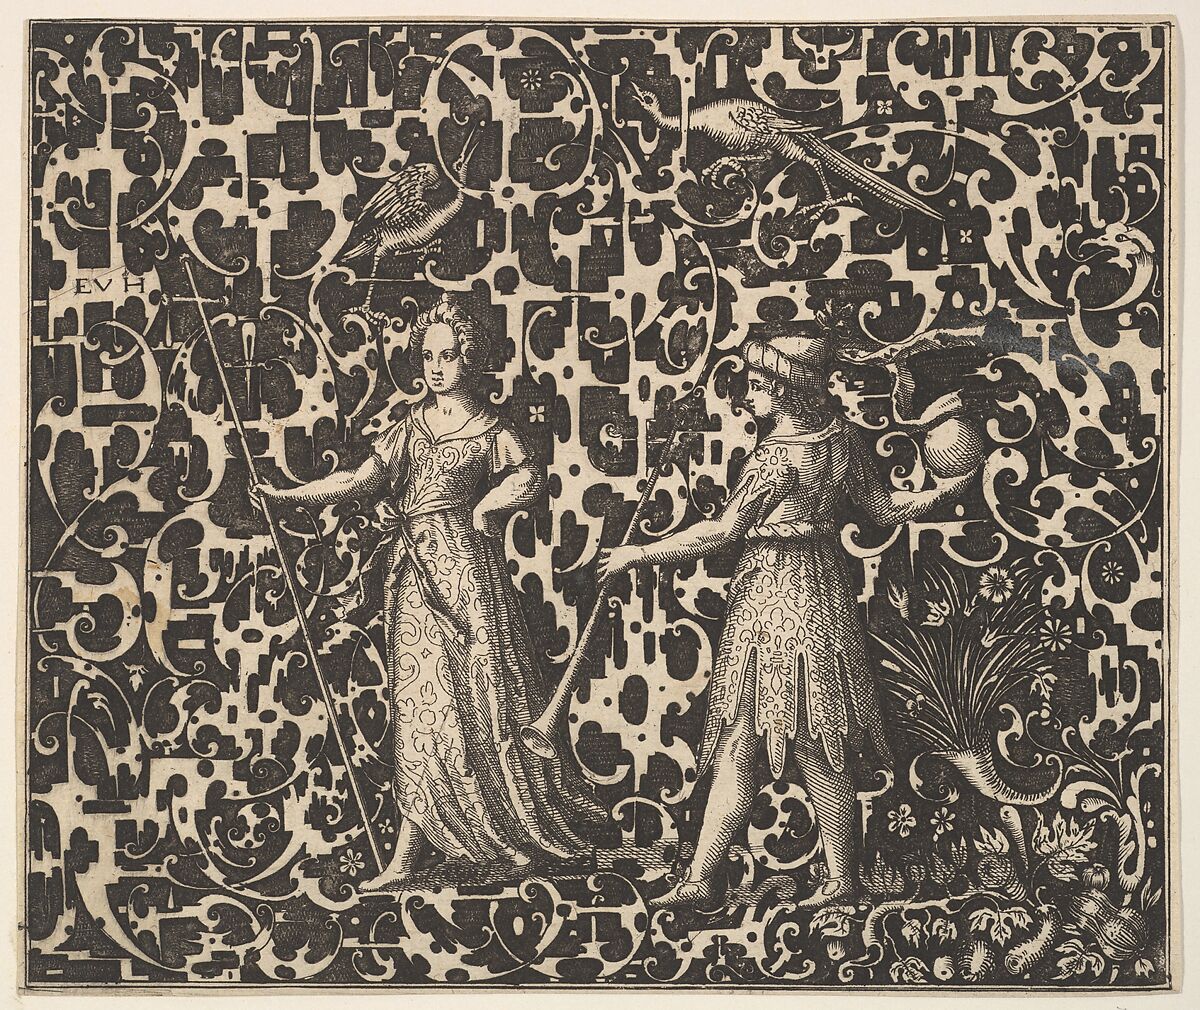 Ornament Print with Schweifwerk and Two (Allegorical?) Figures